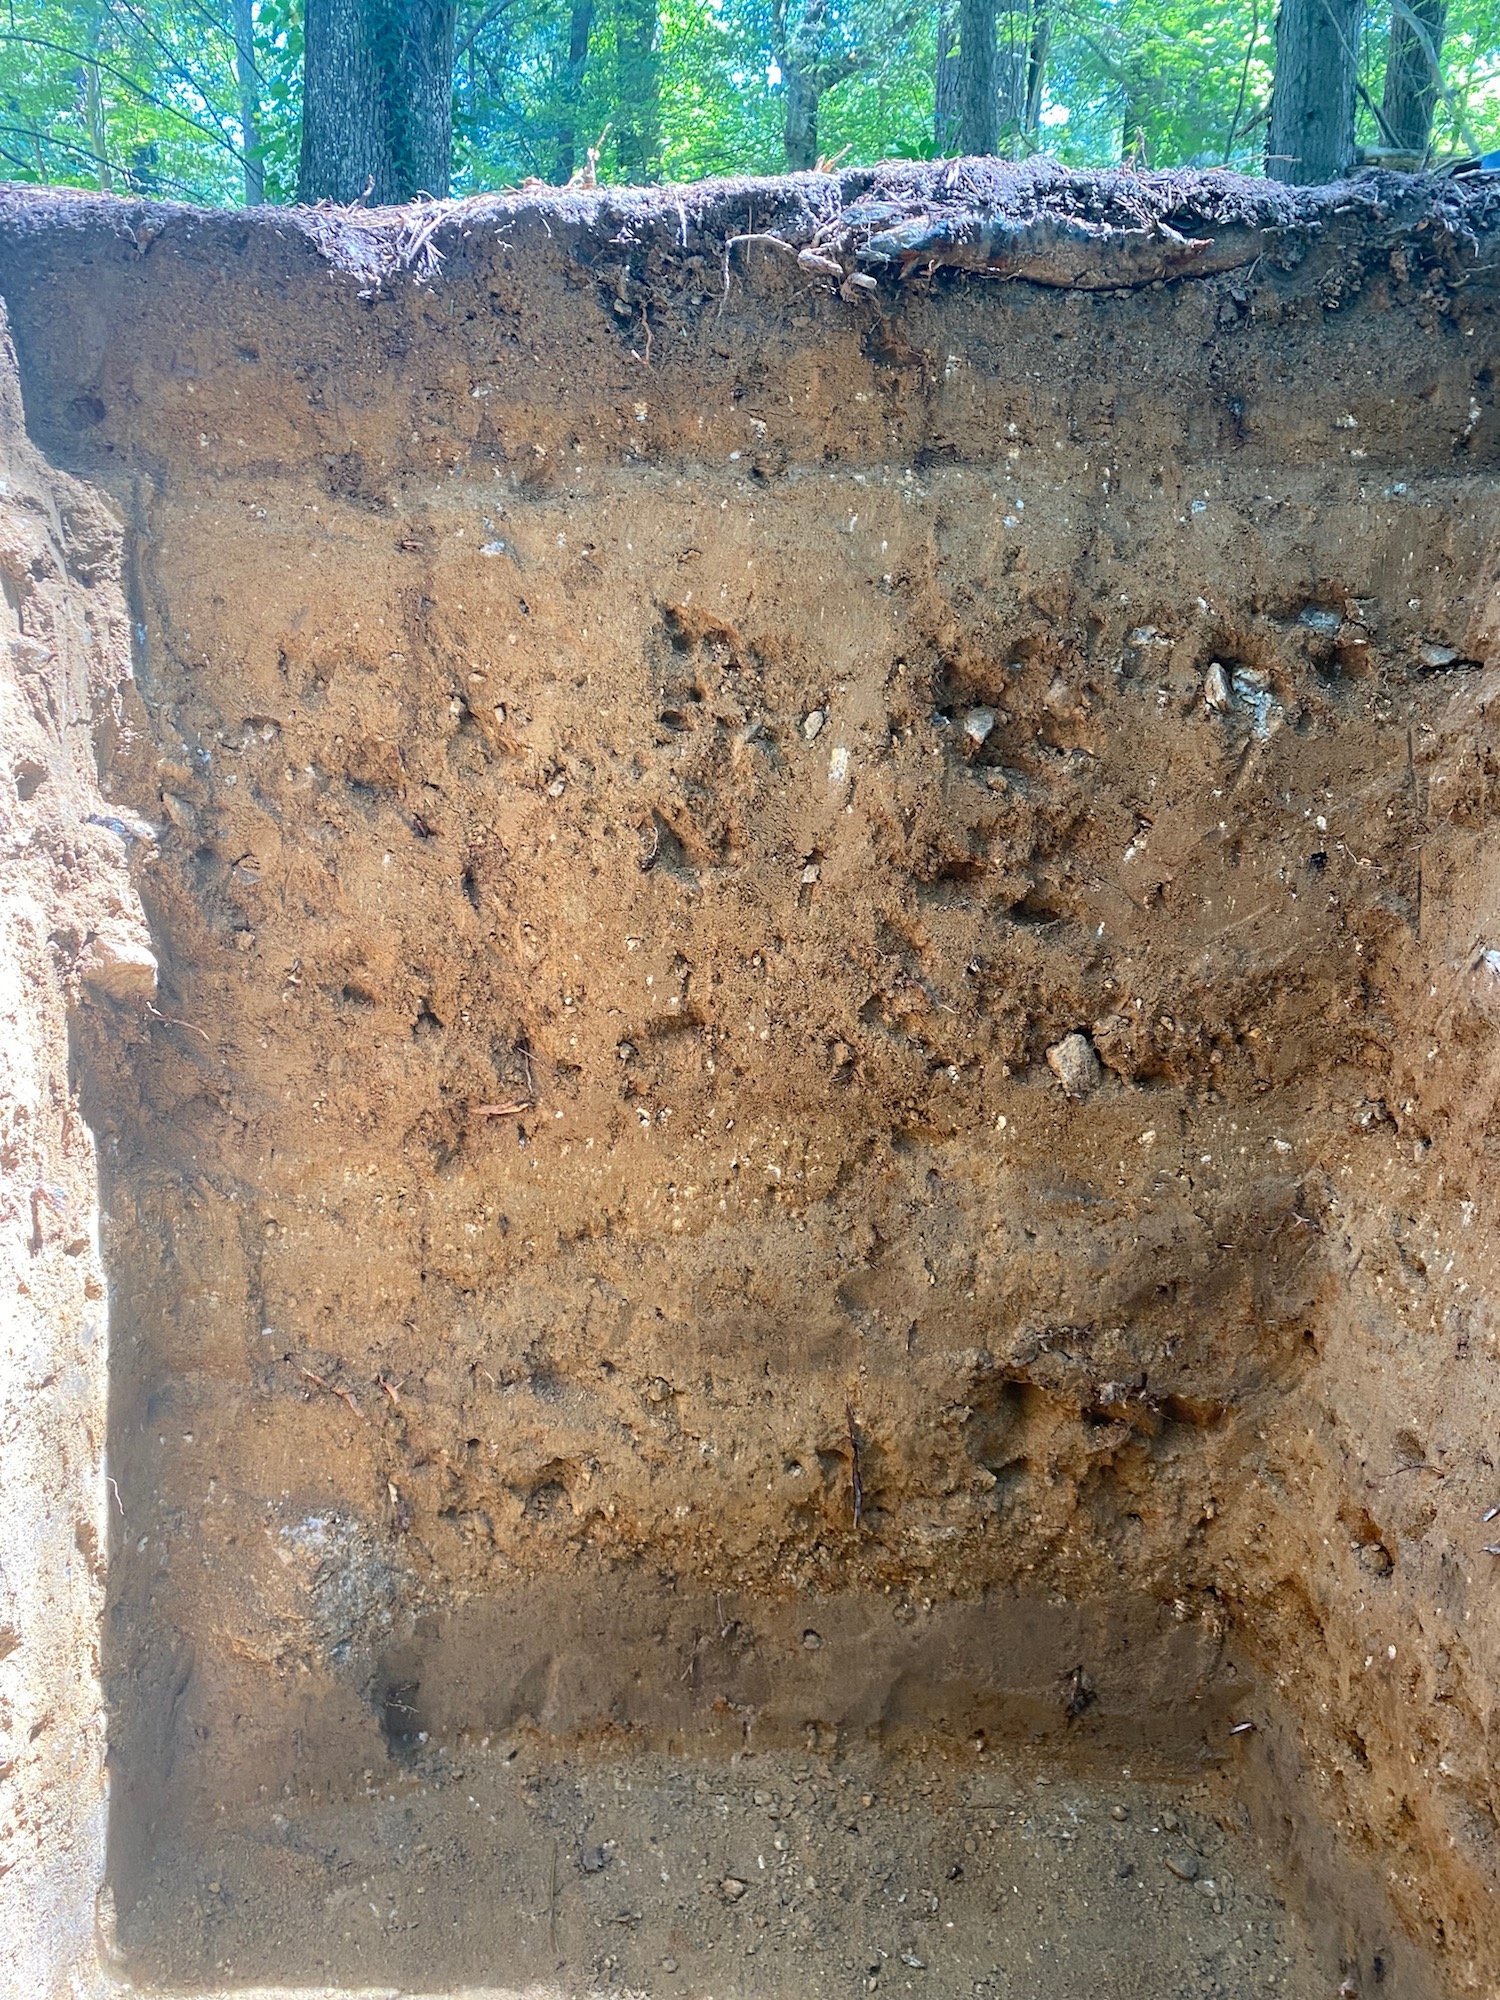 Cross section of excavation trench